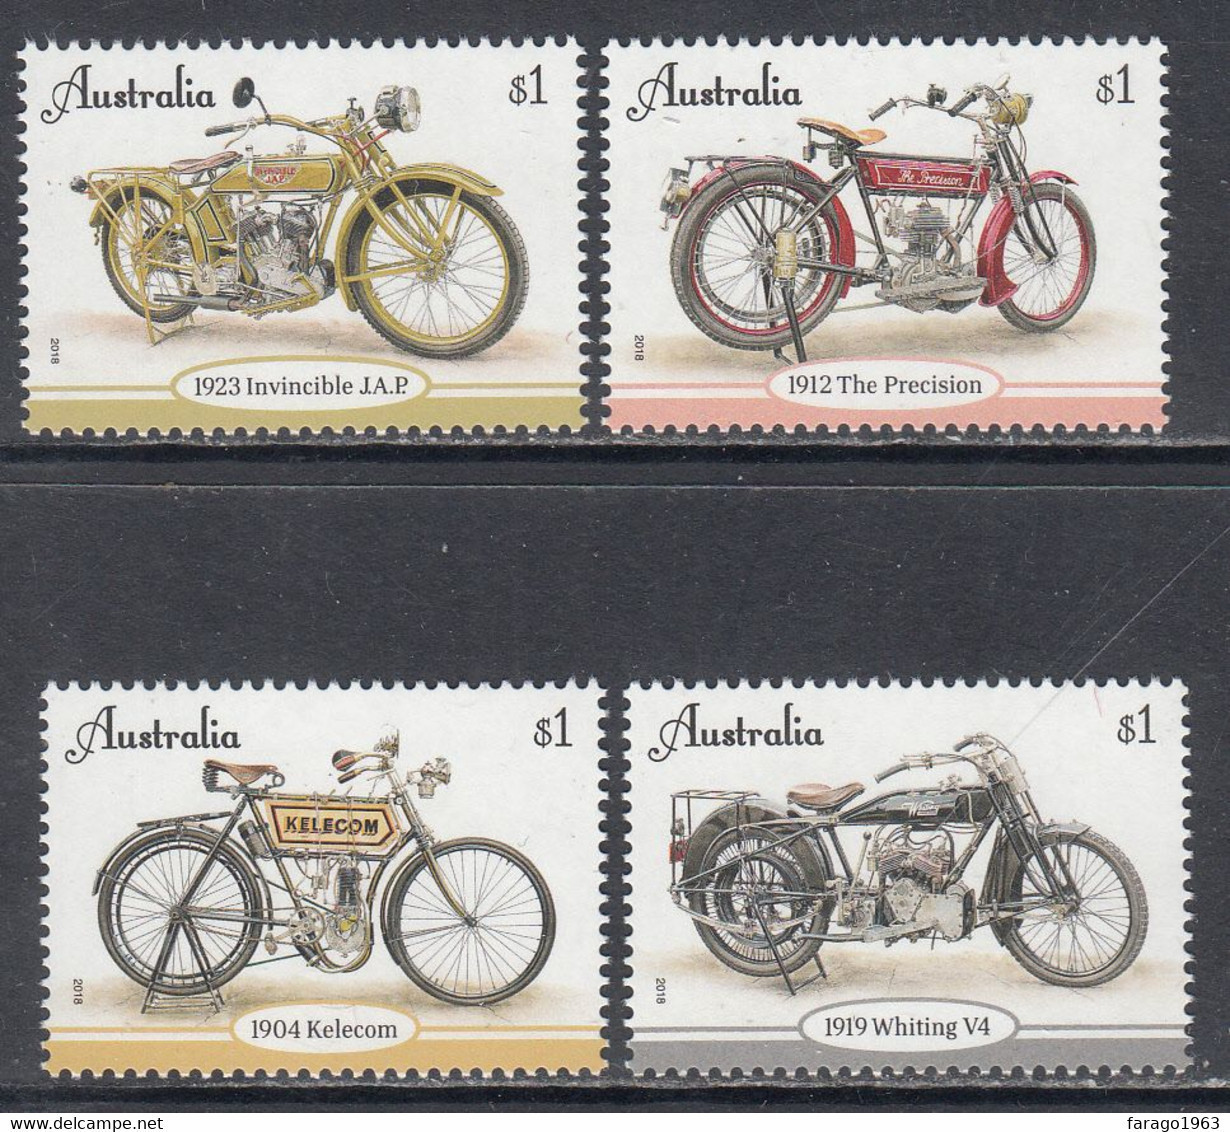 2018 Australia Motorcycles Motorbikes Complete Set Of 4 MNH @ Below Face Value - Mint Stamps